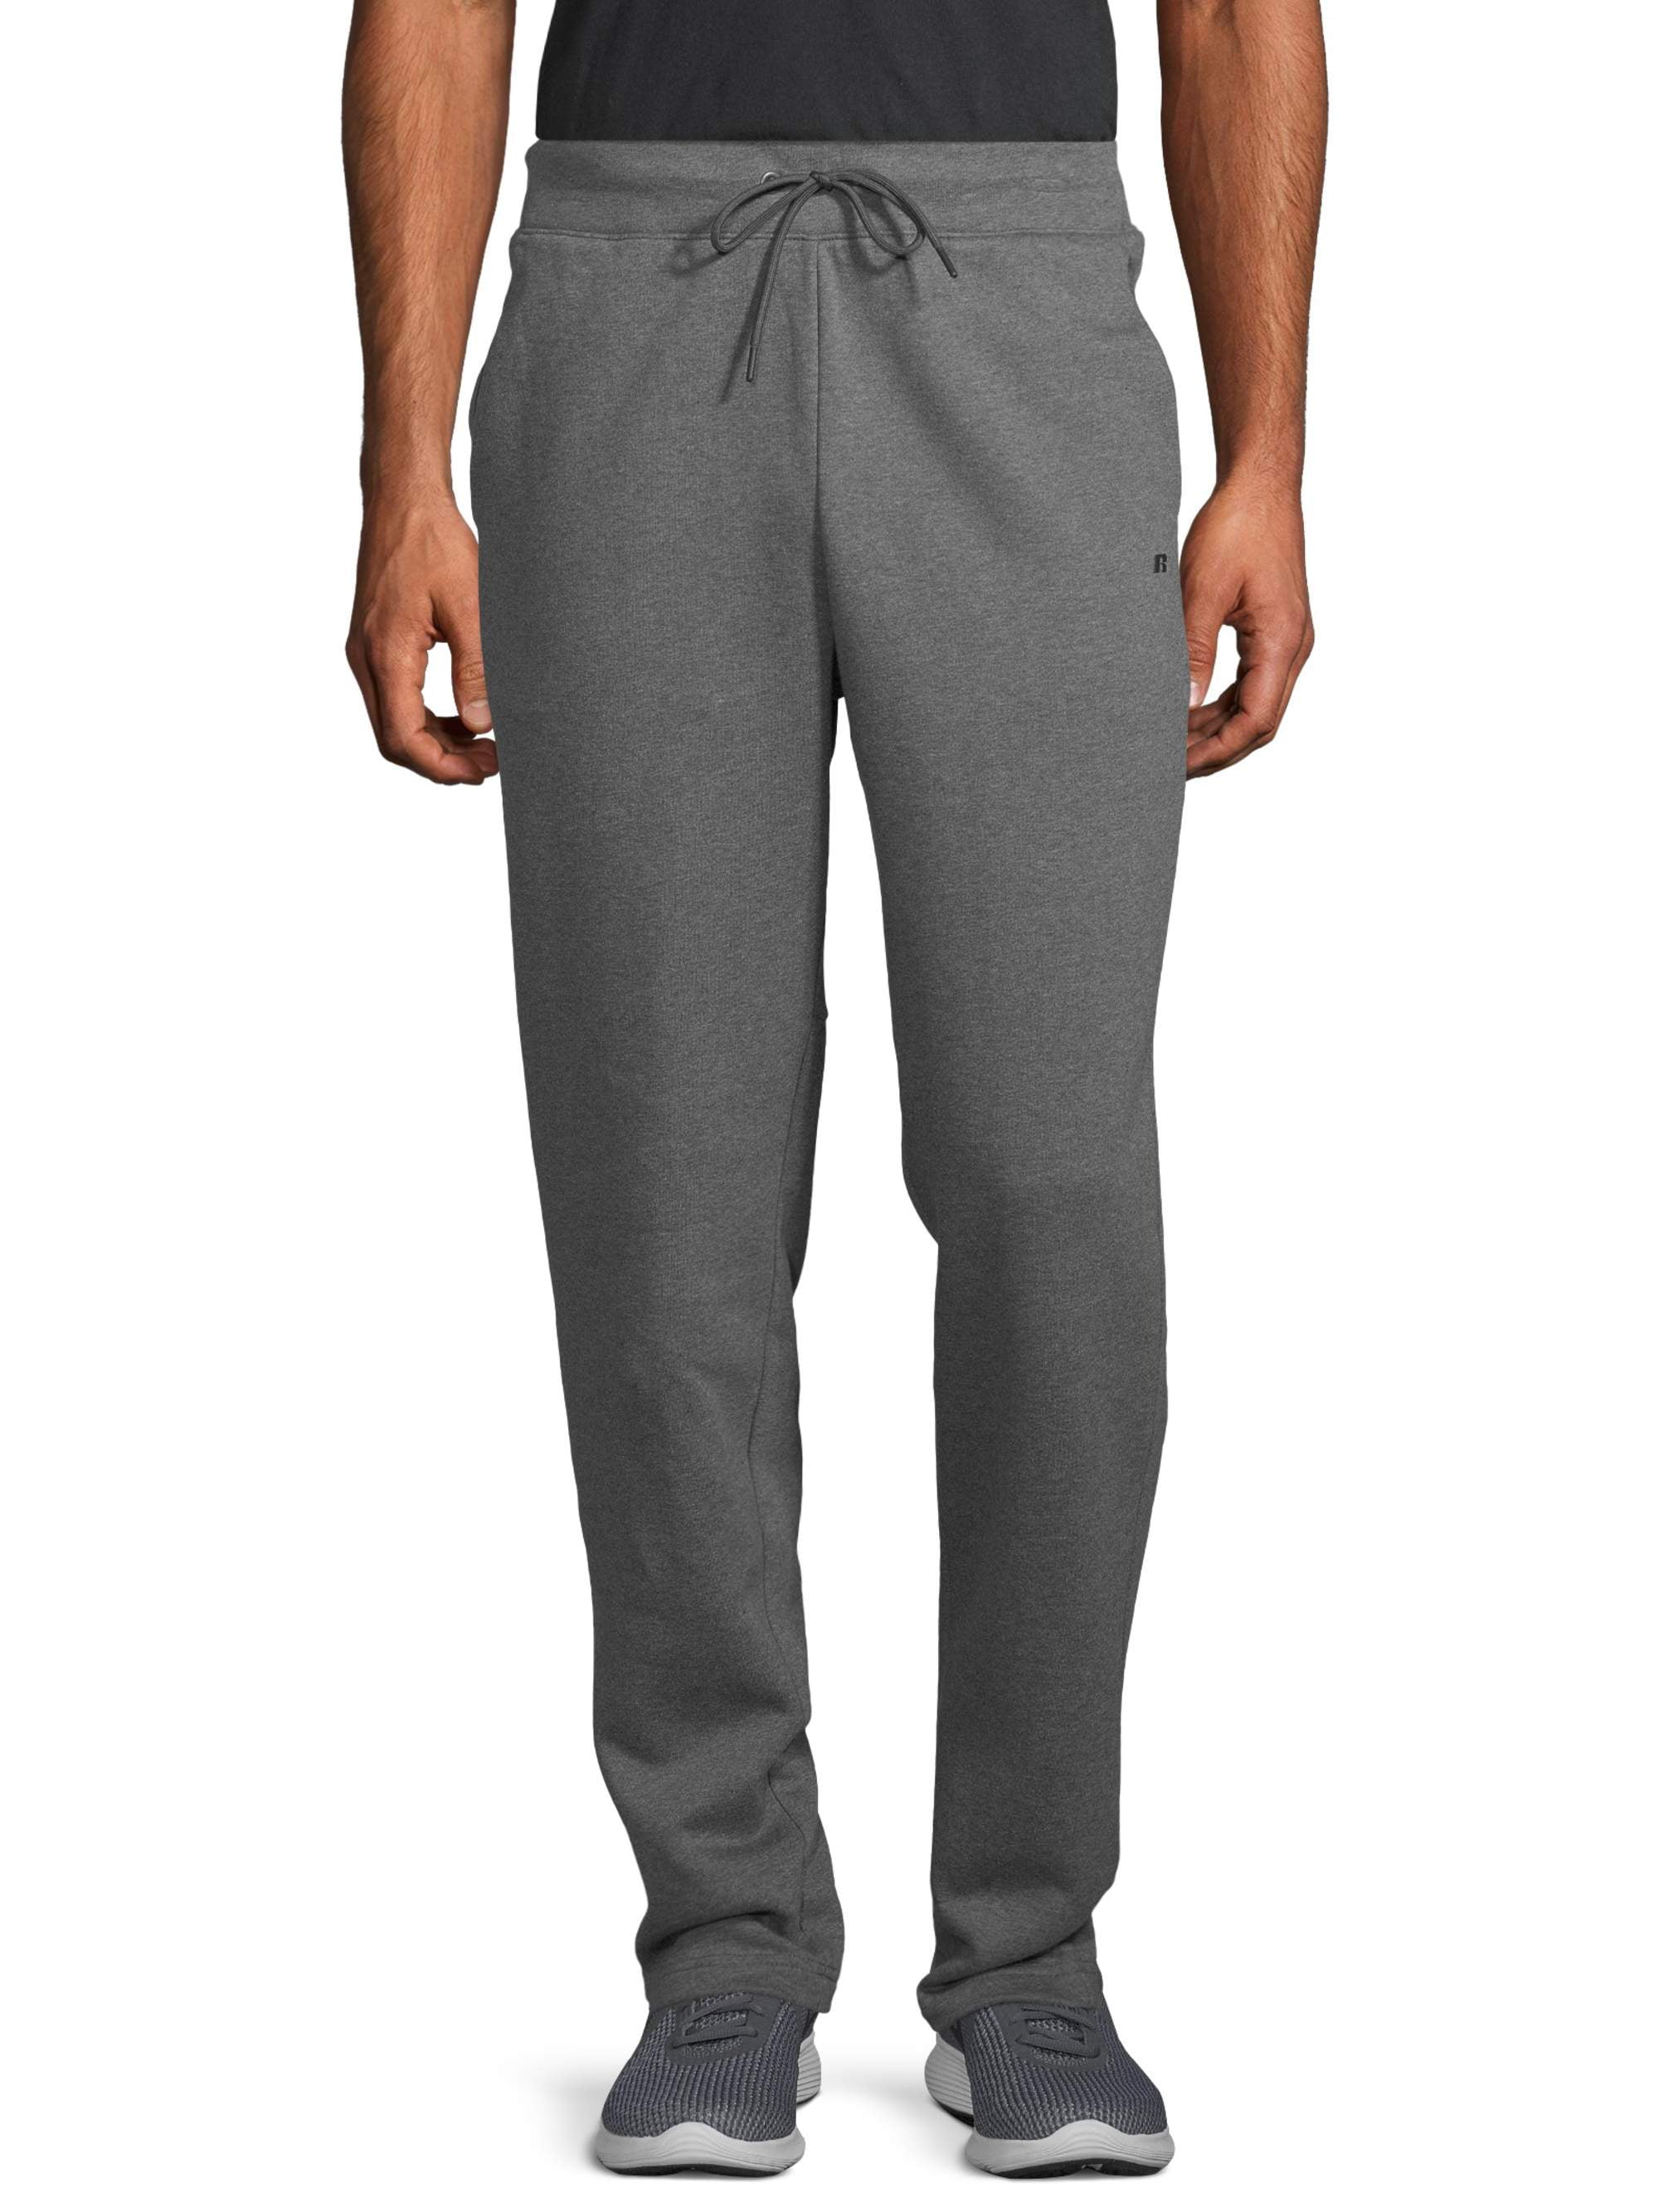 Russell Men's and Big Men's Premium Fleece Pant, up to Size 5XL ...